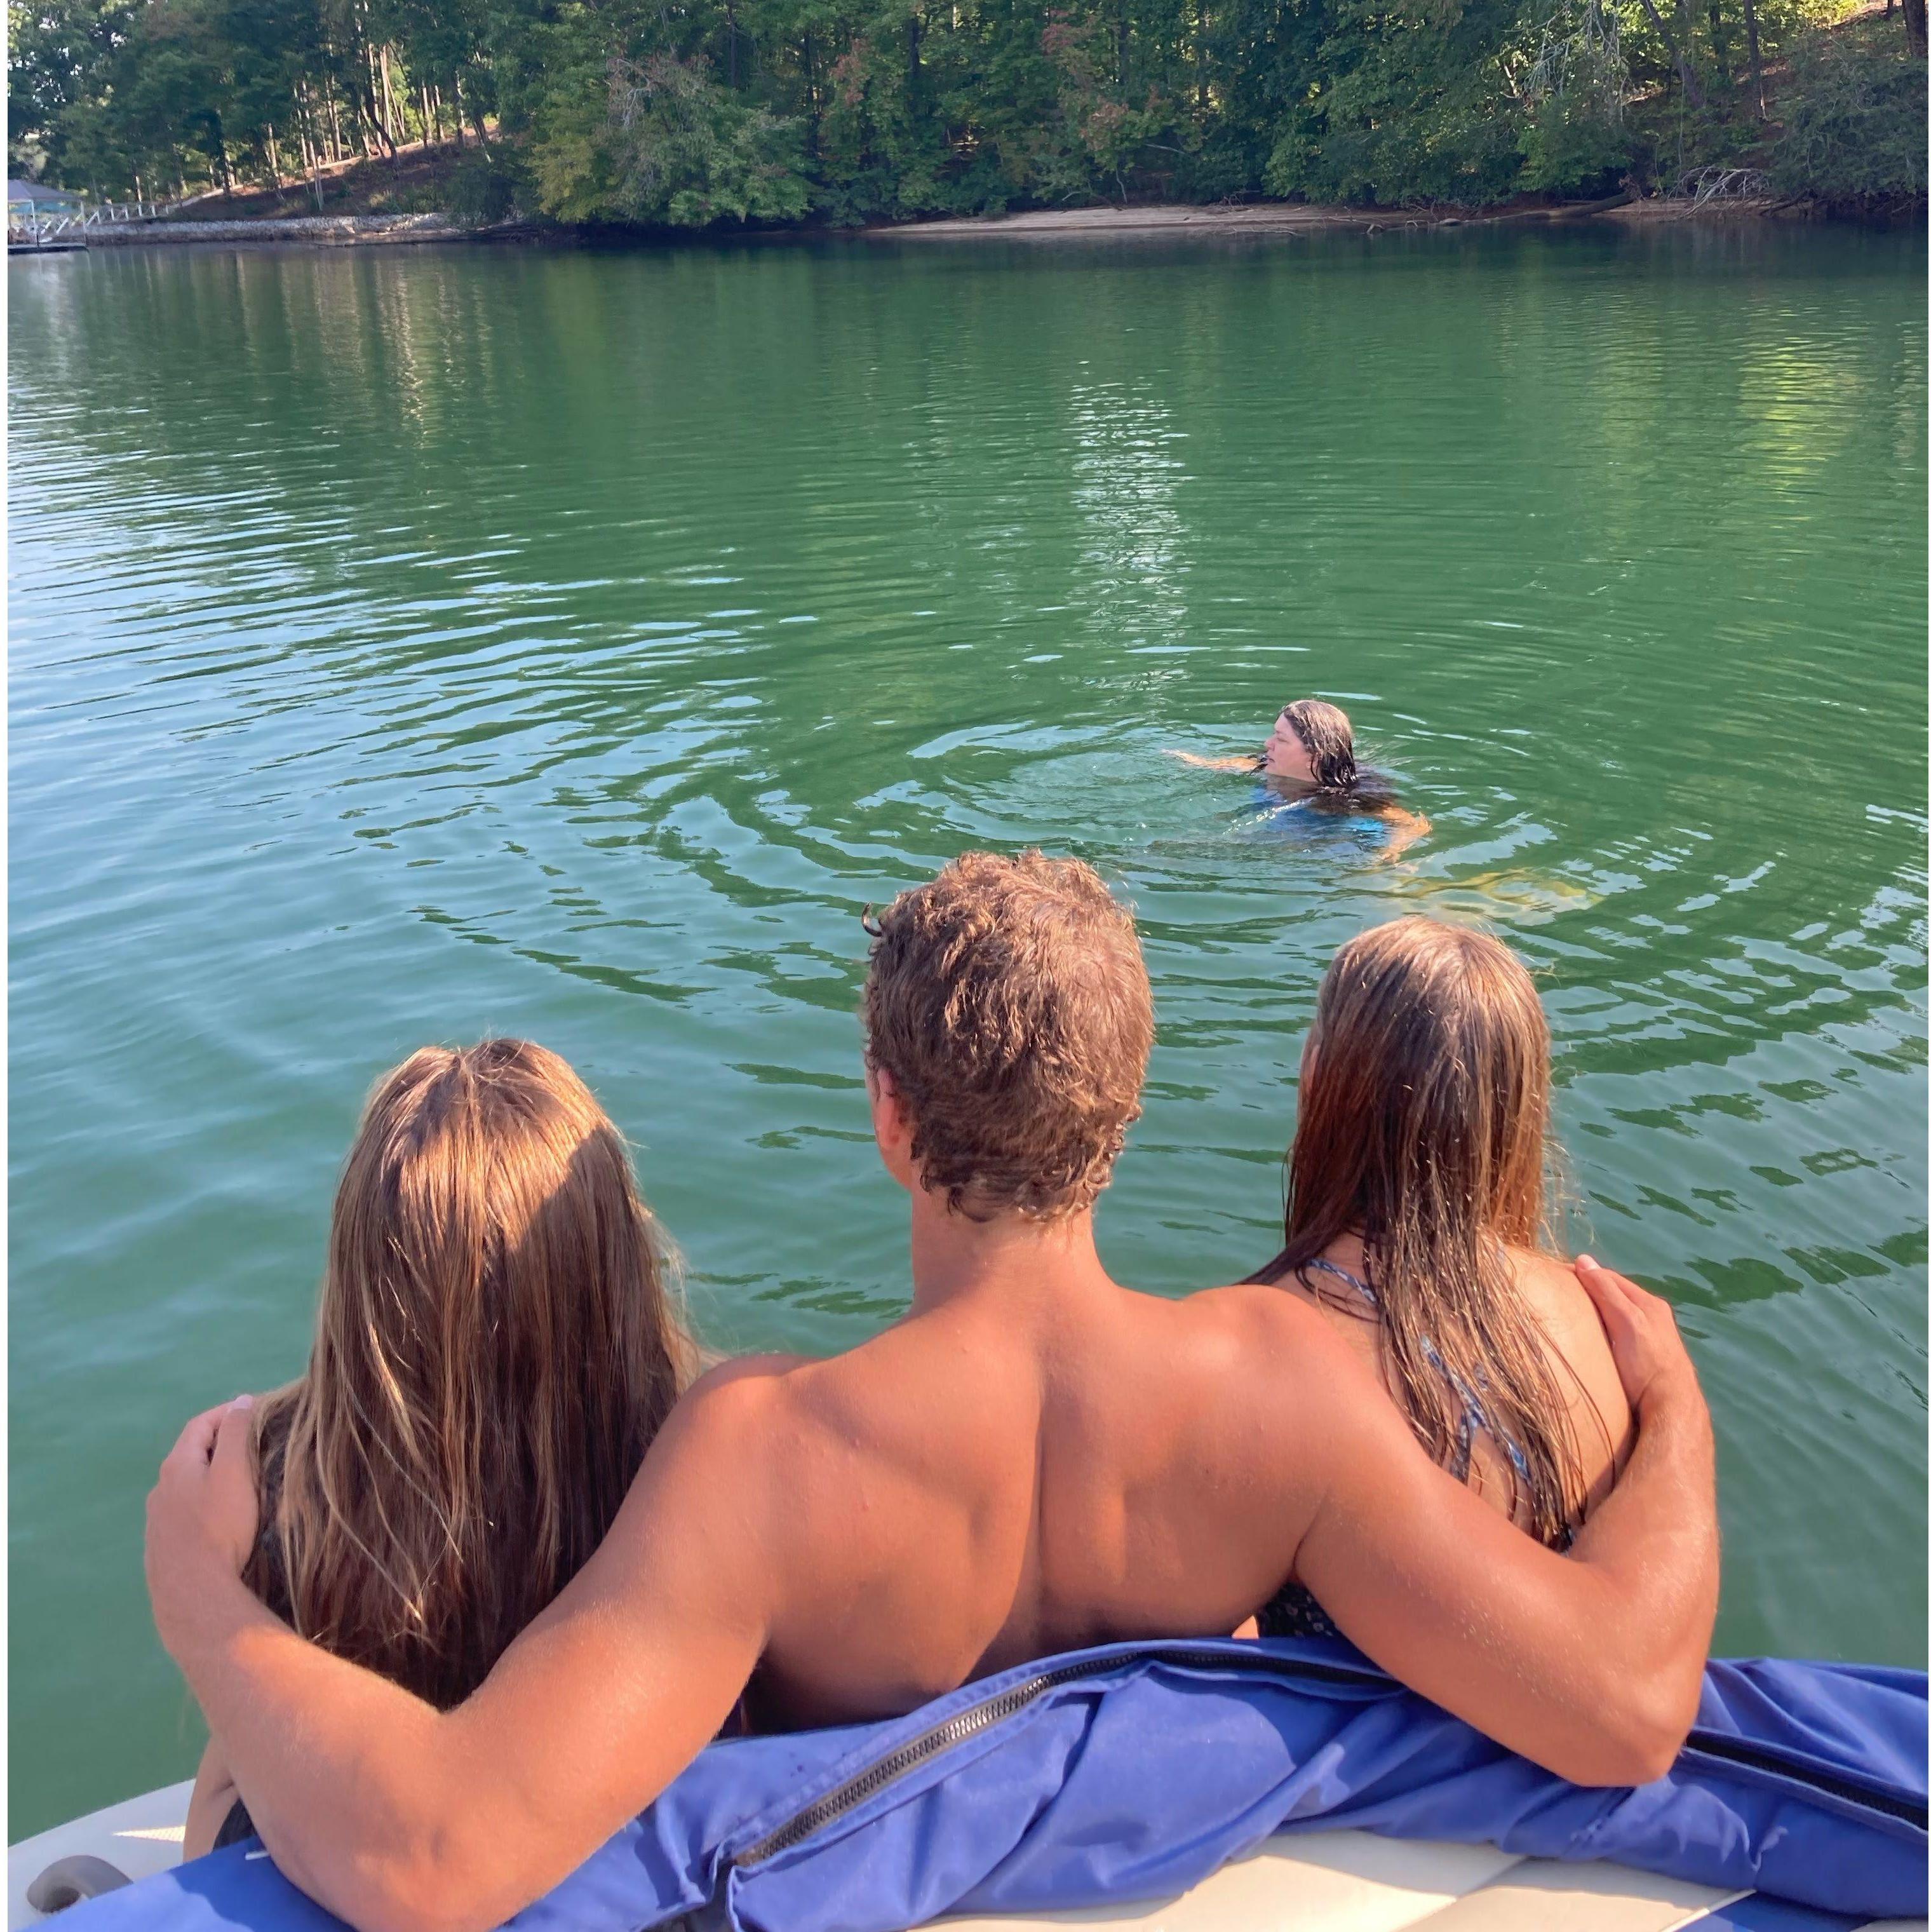 Trent, Madison, and Victoria relaxing on the edge of the boat